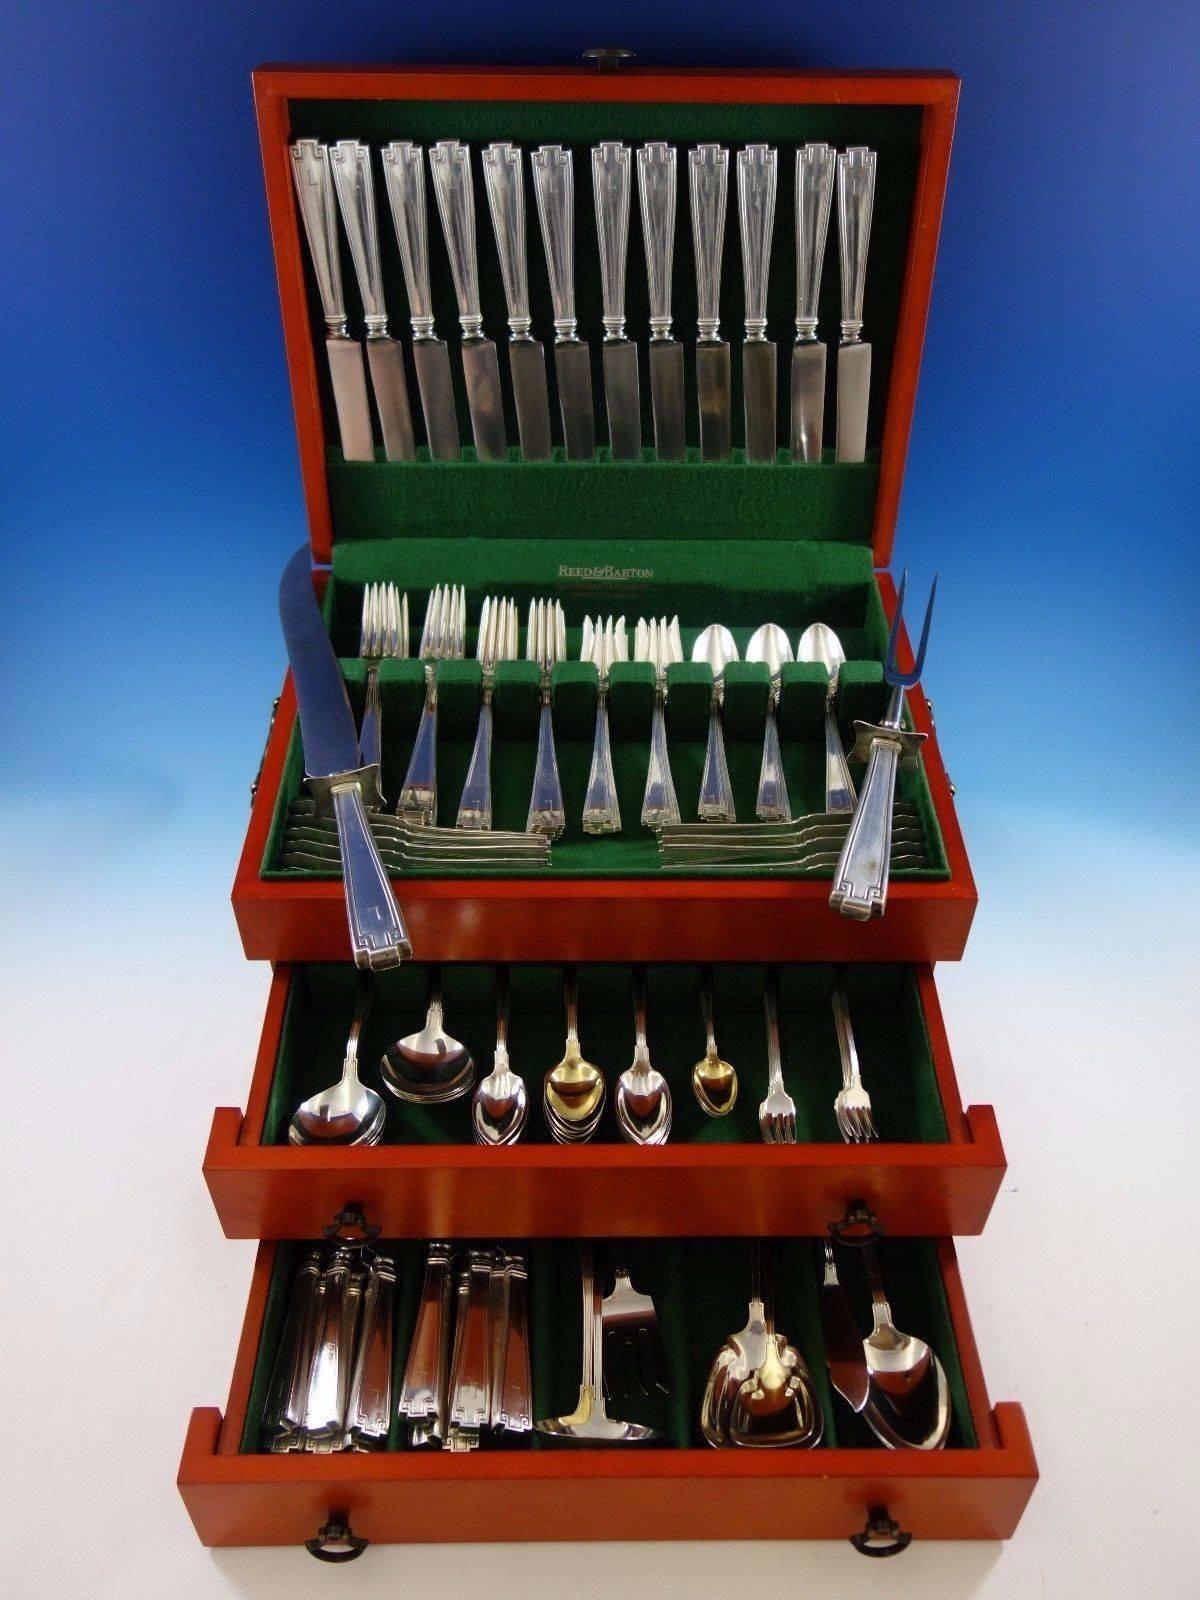 Etruscan by Gorham sterling silver flatware set of 142 pieces. This set includes: 

12 dinner knives, 9 5/8